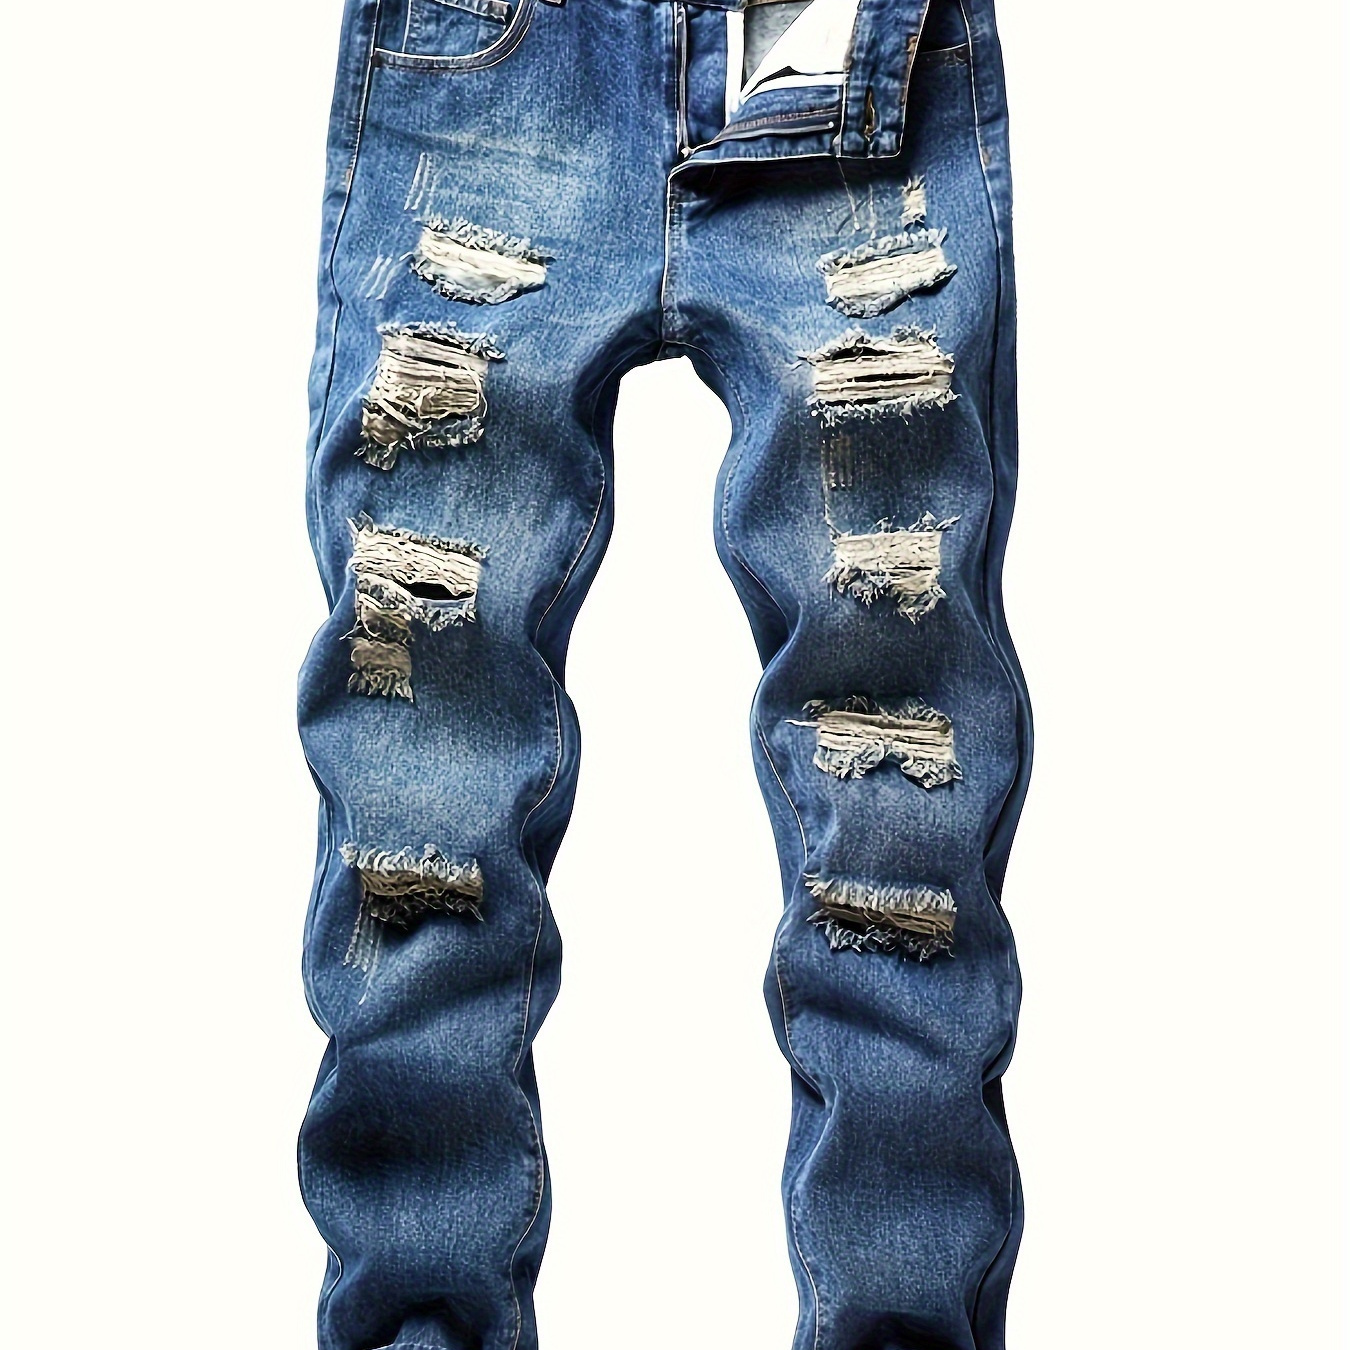 

Men's Vintage Ripped Jeans Casual Straight Leg Slim Fit Jeans Best Sellers